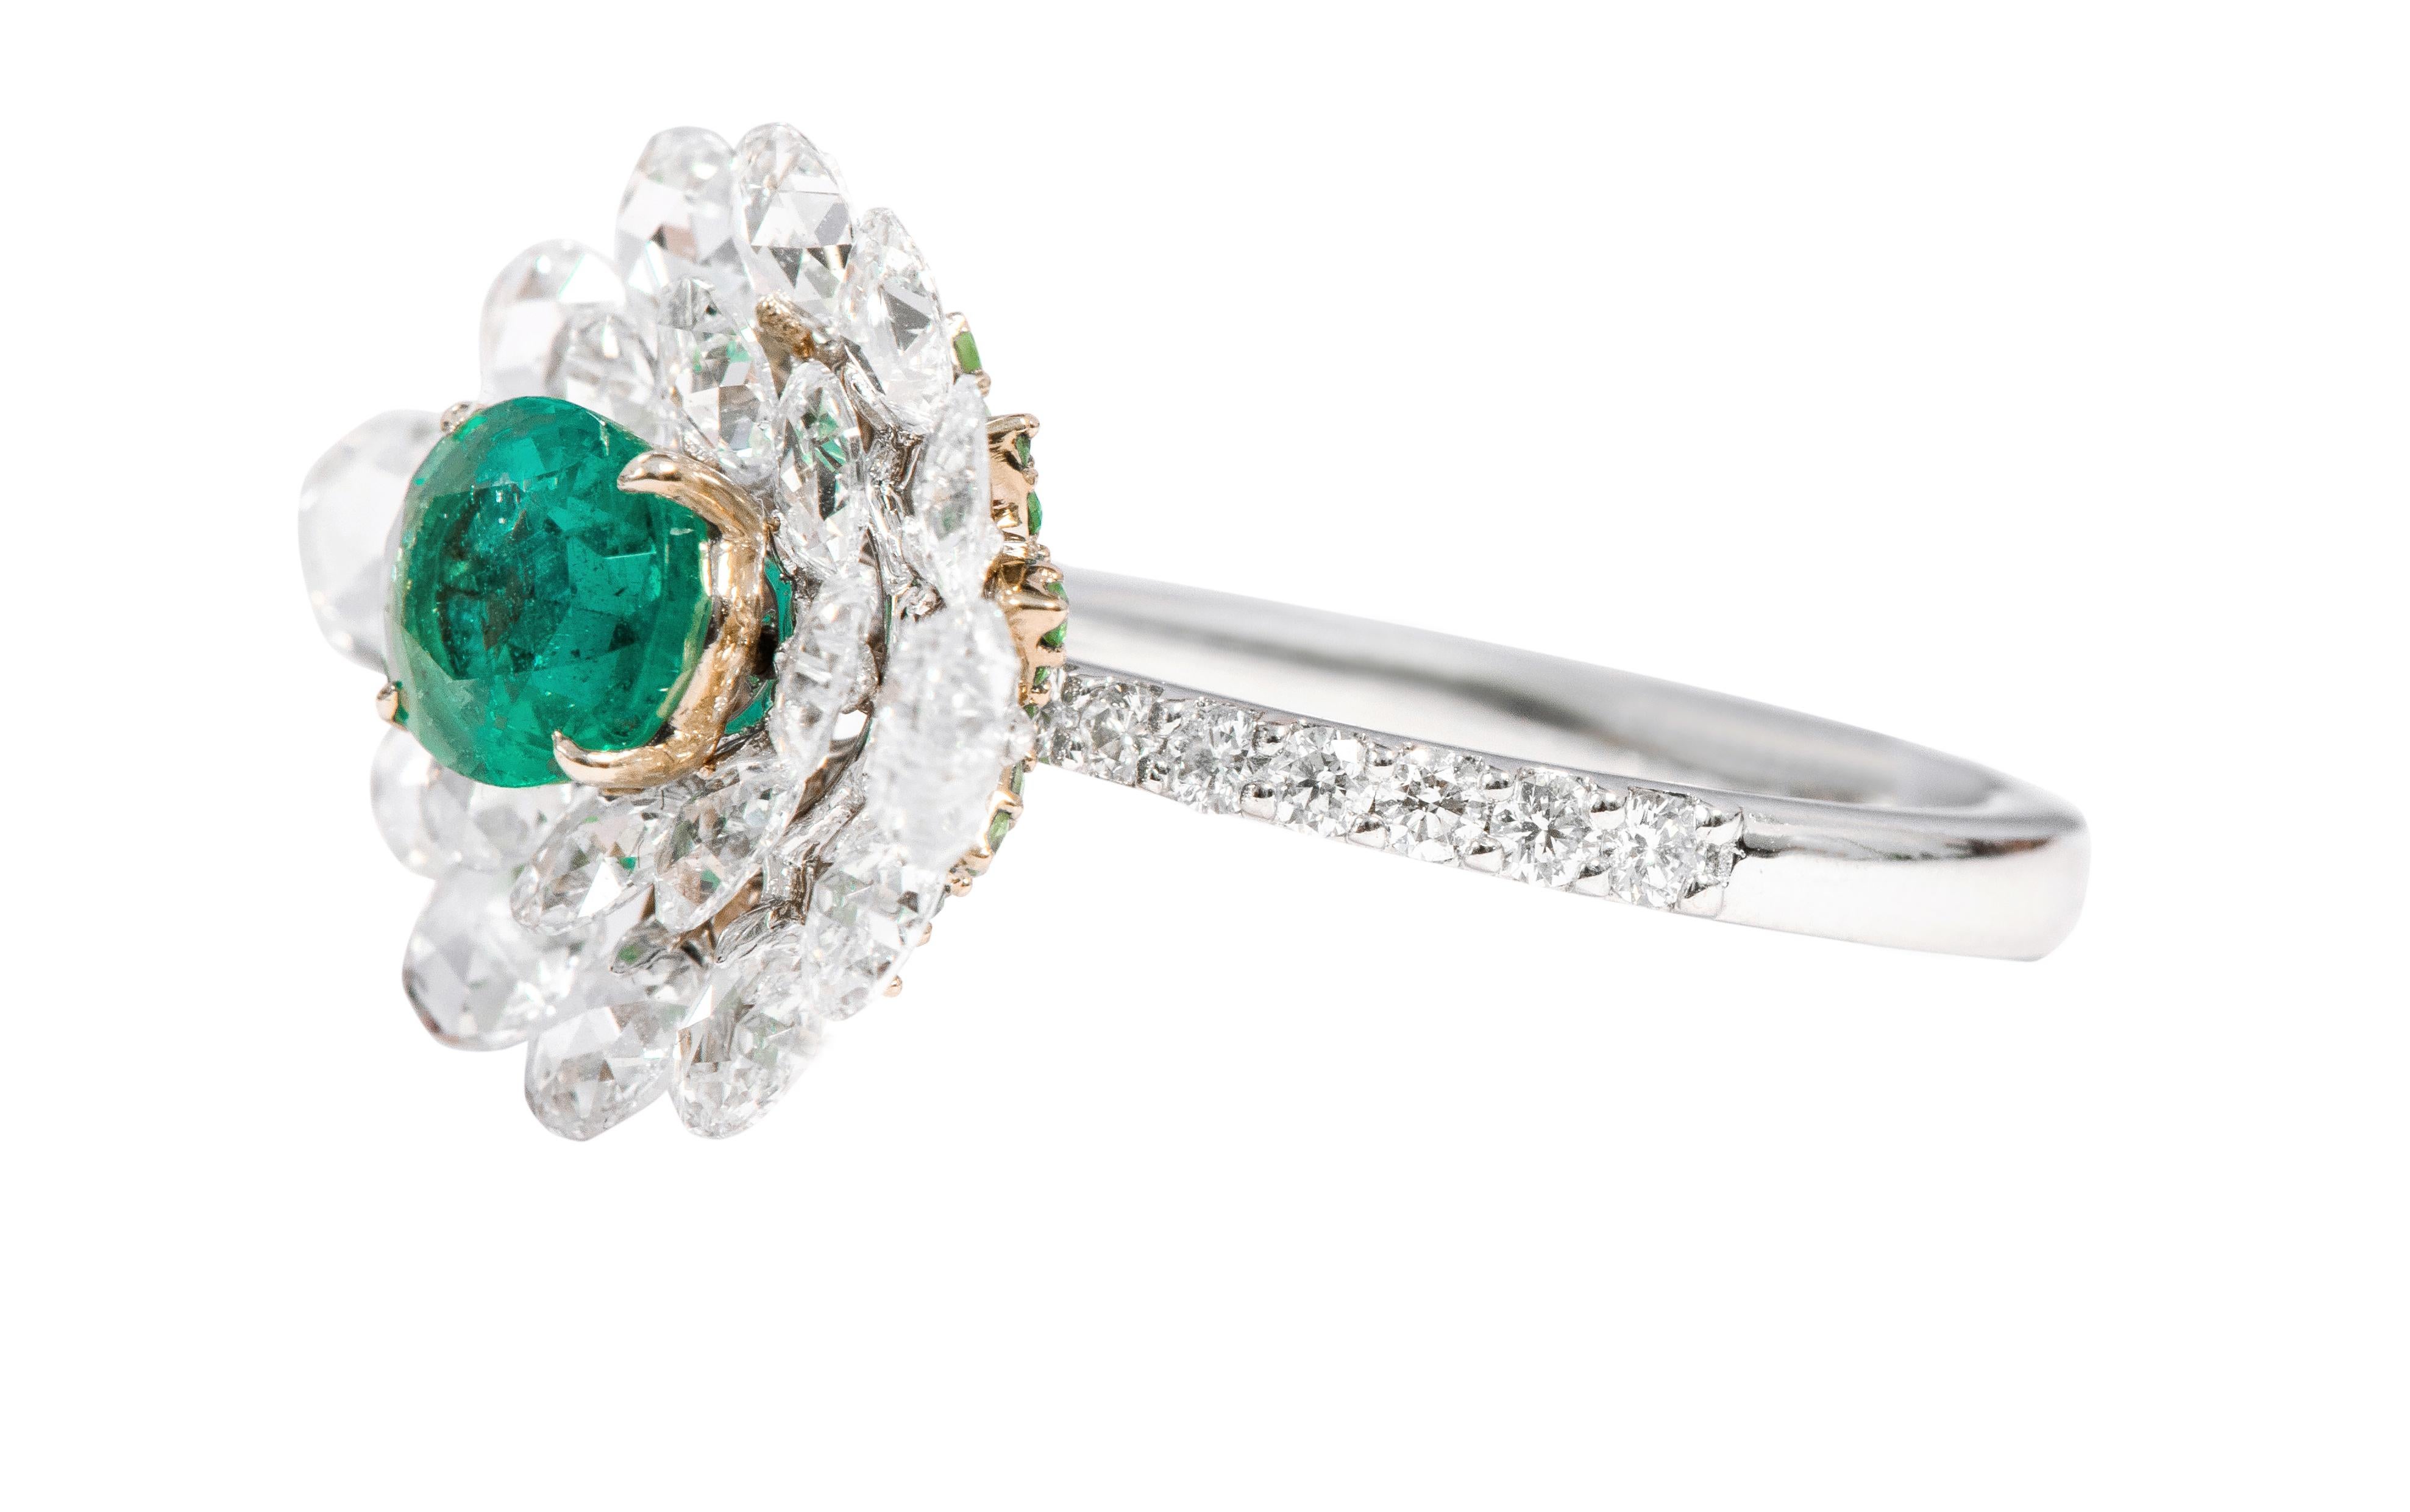 18 Karat White Gold 1.10 Carat Natural Emerald and Diamond Rose-Cut Cluster Ring

This impeccable vibrant green emerald and diamond rose-cut solitaire cocktail ring is fascinating. The ring sets itself apart with the exquisite solitaire oval emerald